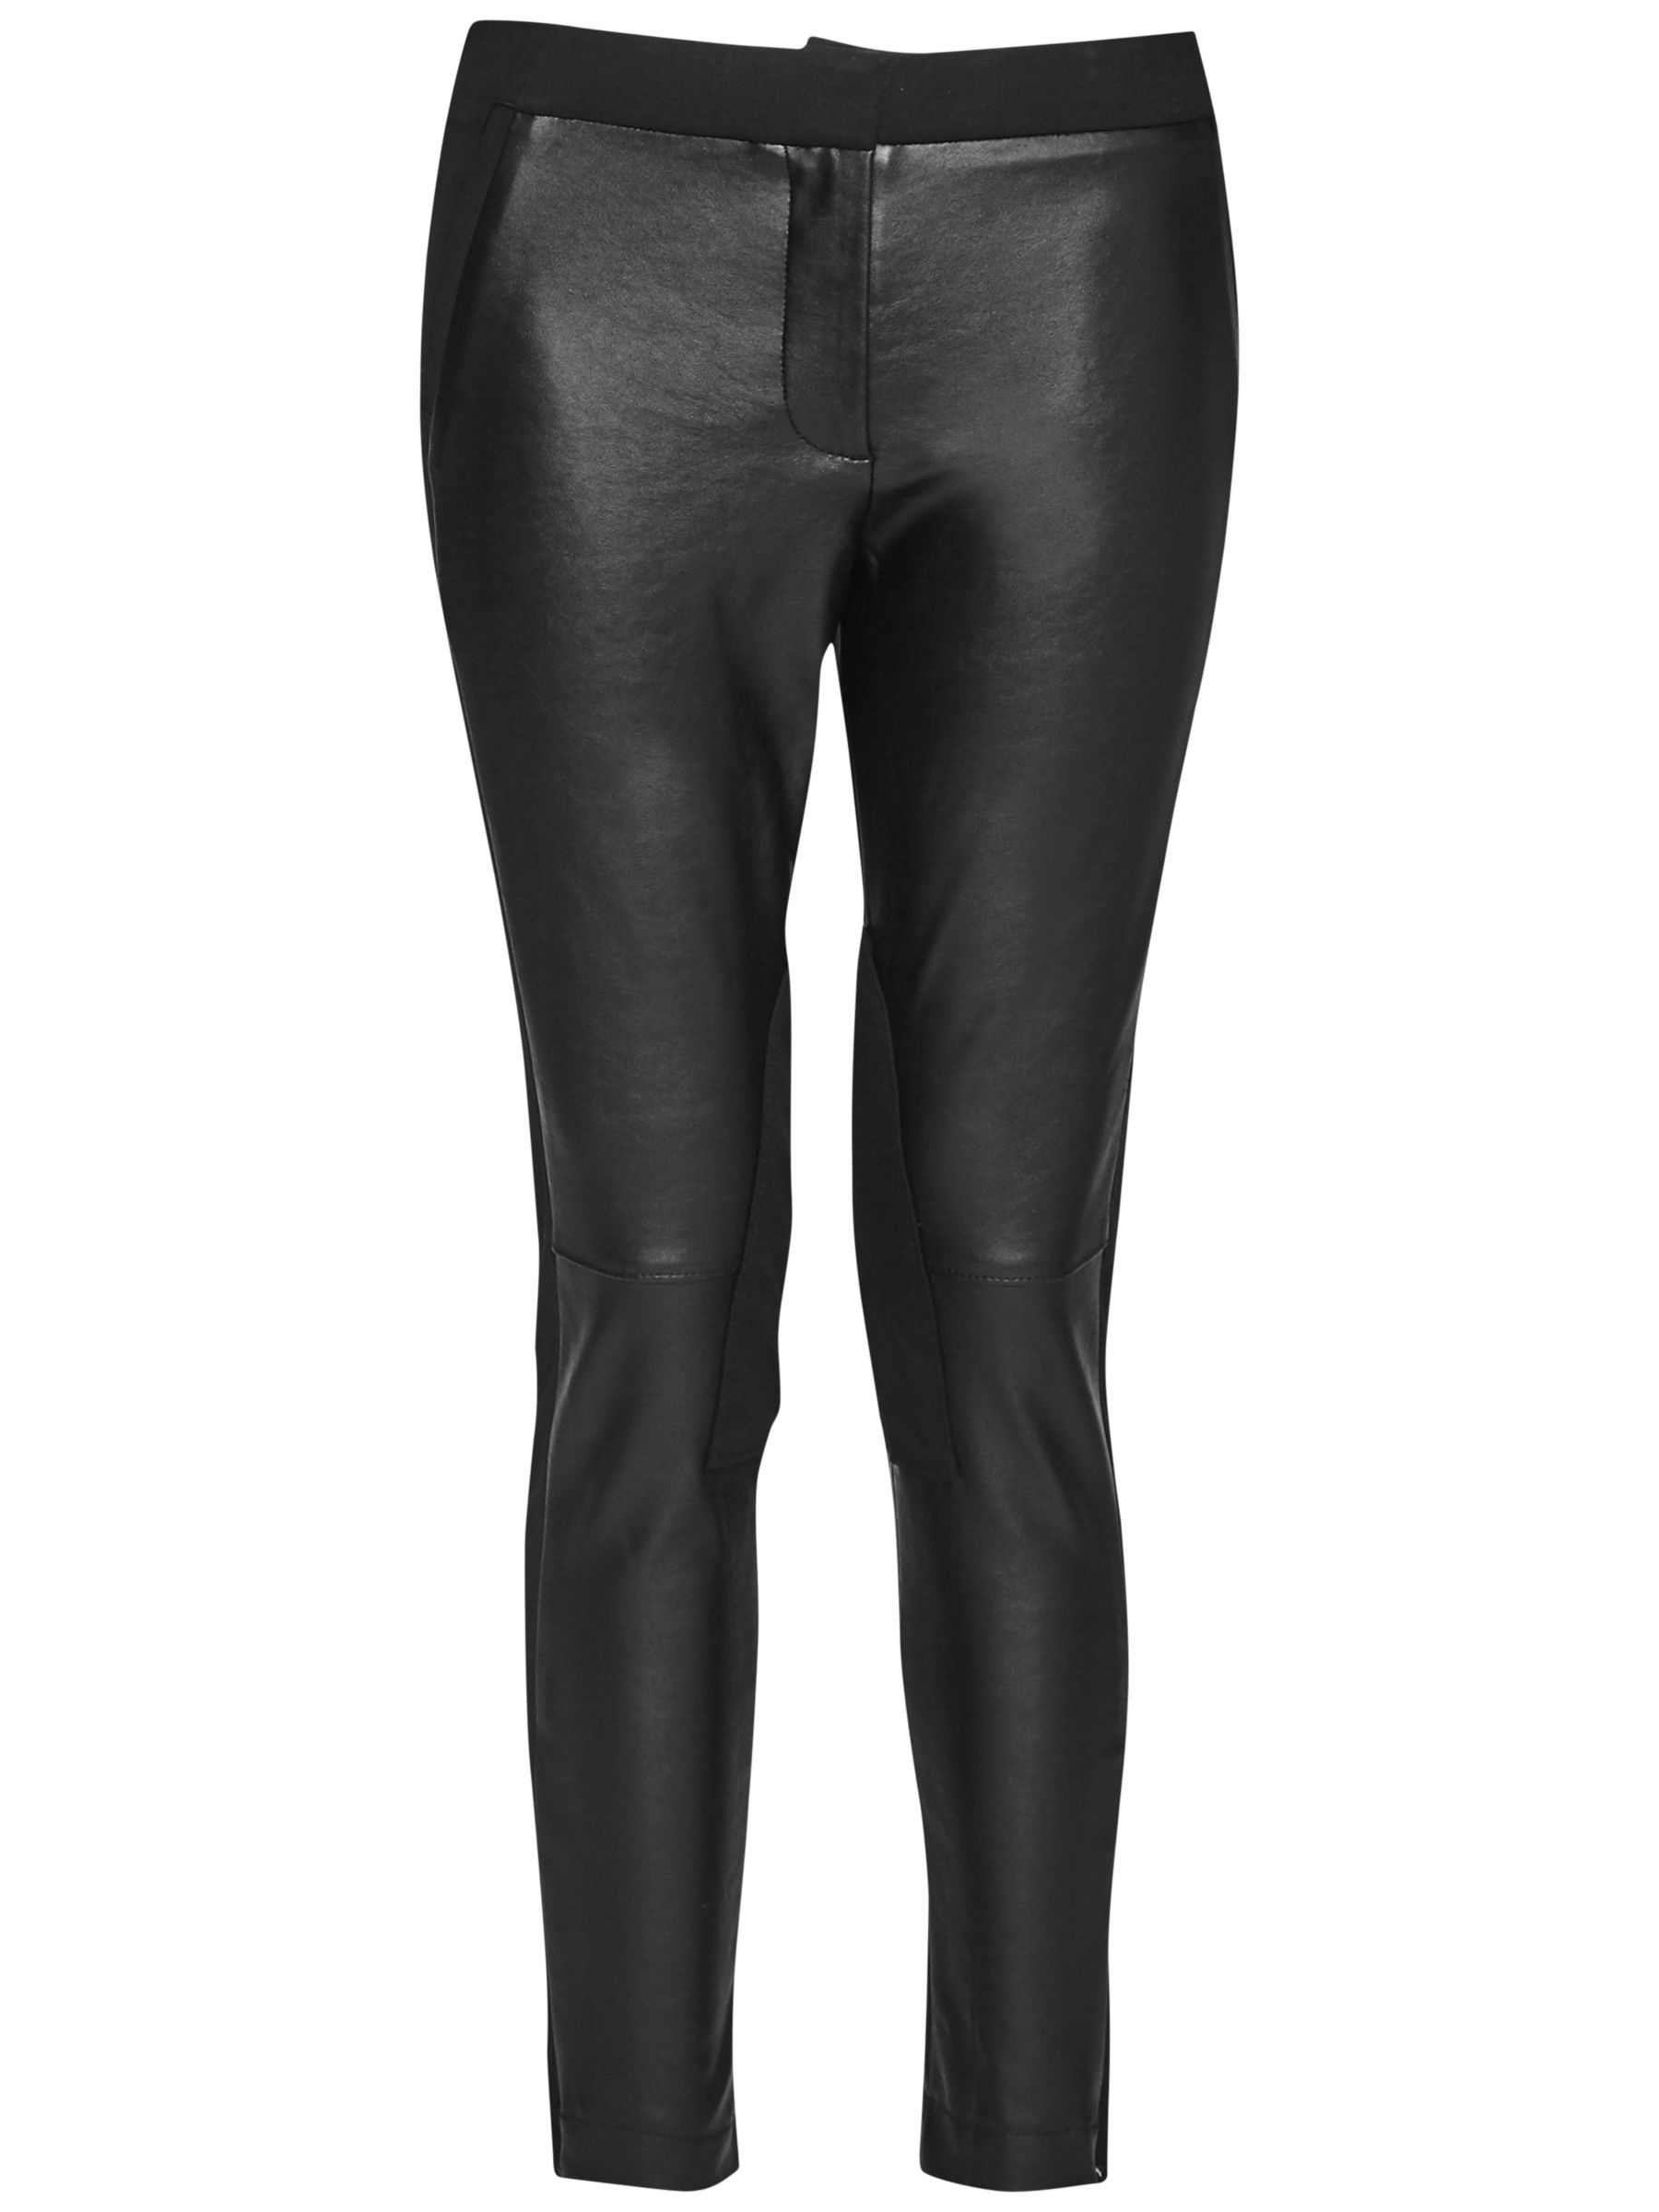 French Connection Street Faux-Leather Trousers, Black at John Lewis ...